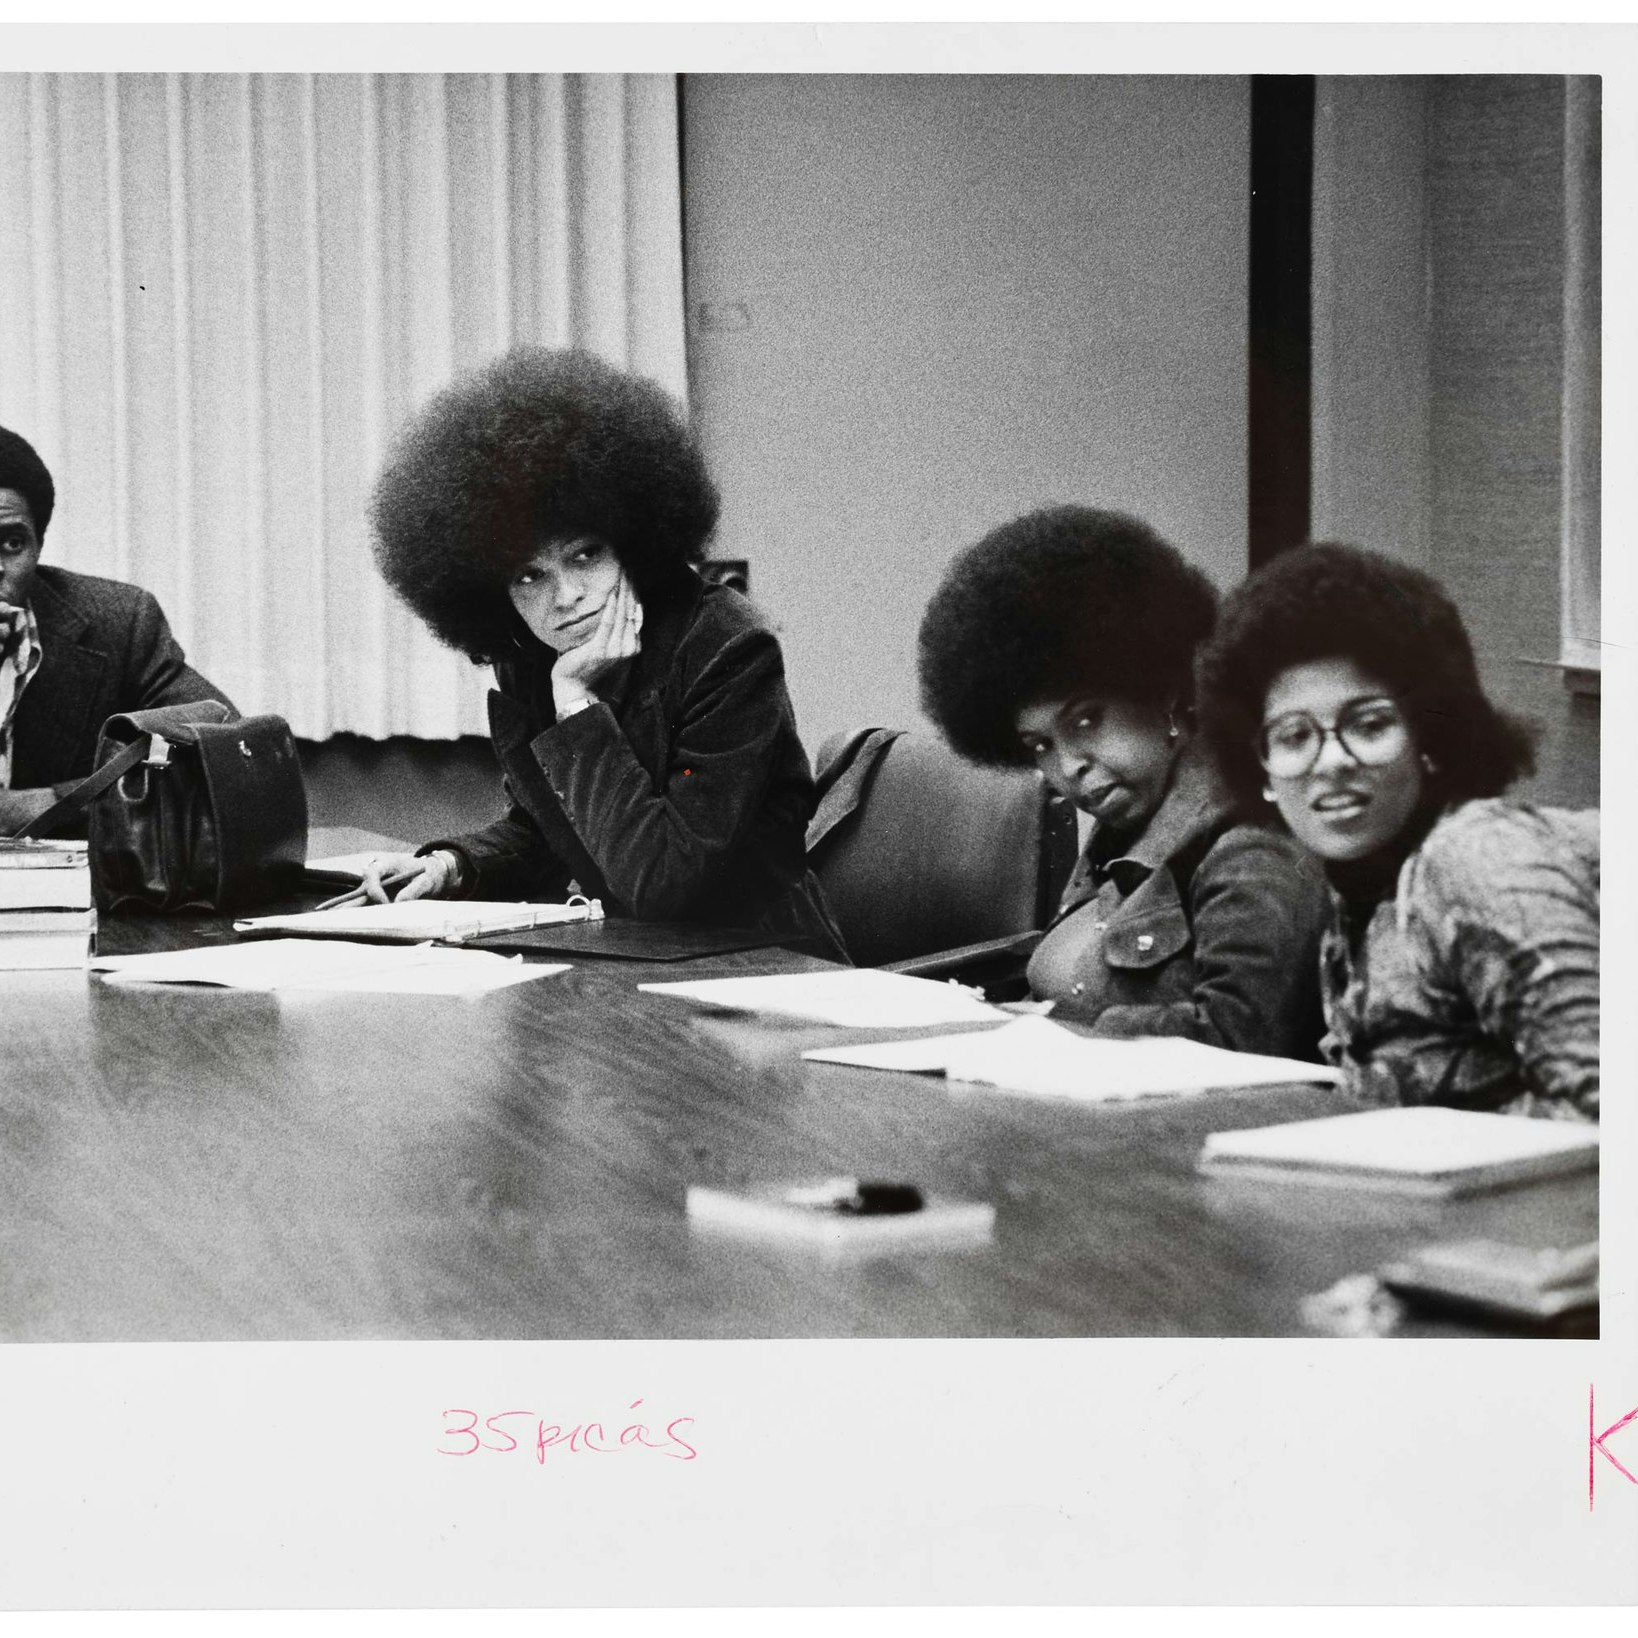 Angela Davis sitting in class with 3 others.